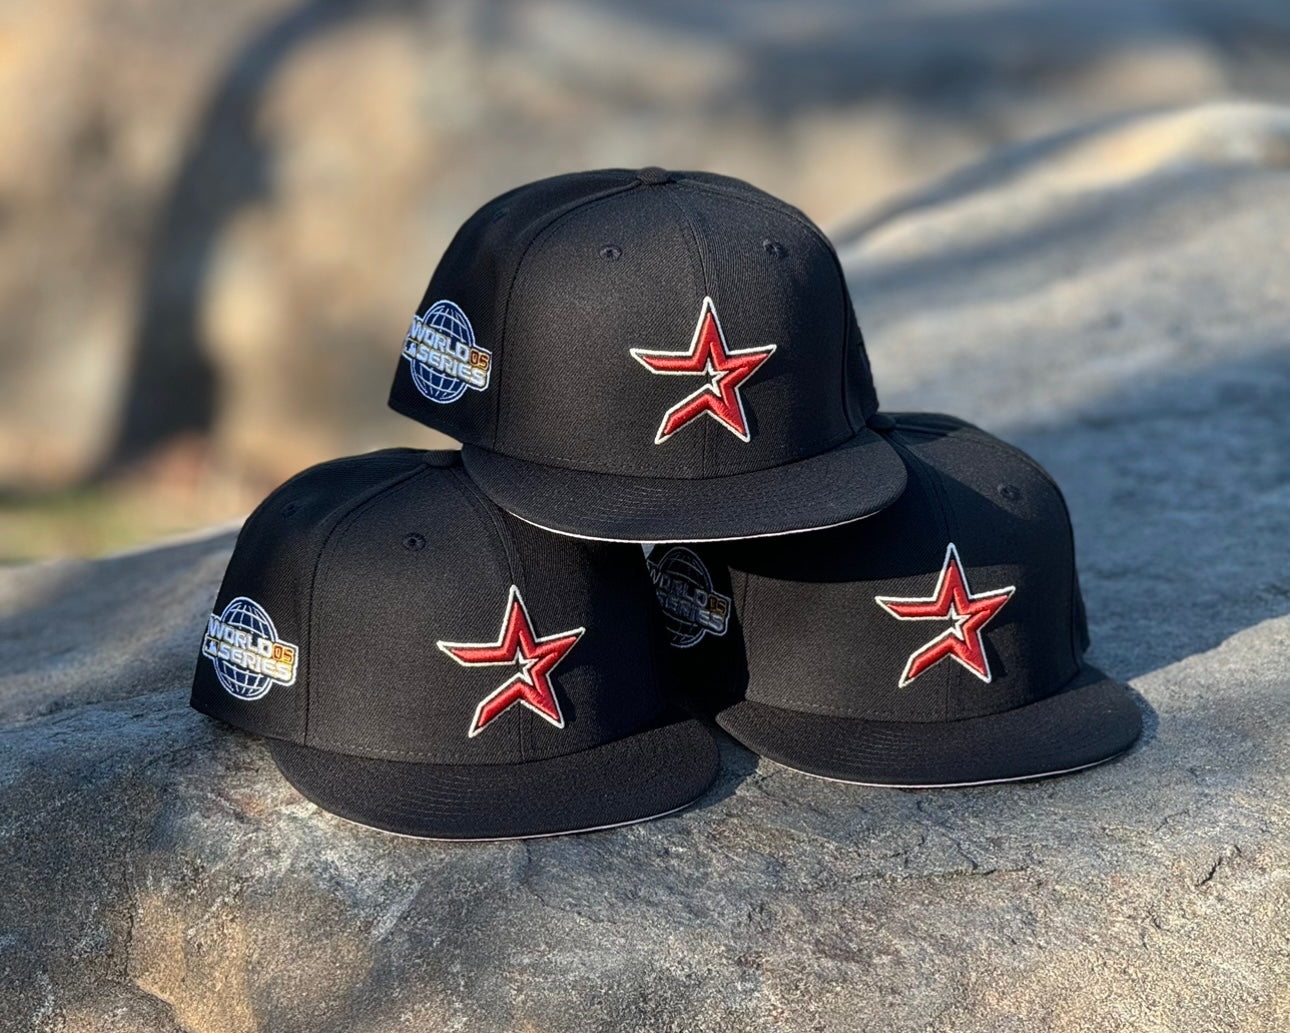 Houston Astros Open Star with 2005 World Series Side Patch Fitted Hat New Era 5950 (Black/Brick Red/Pink)